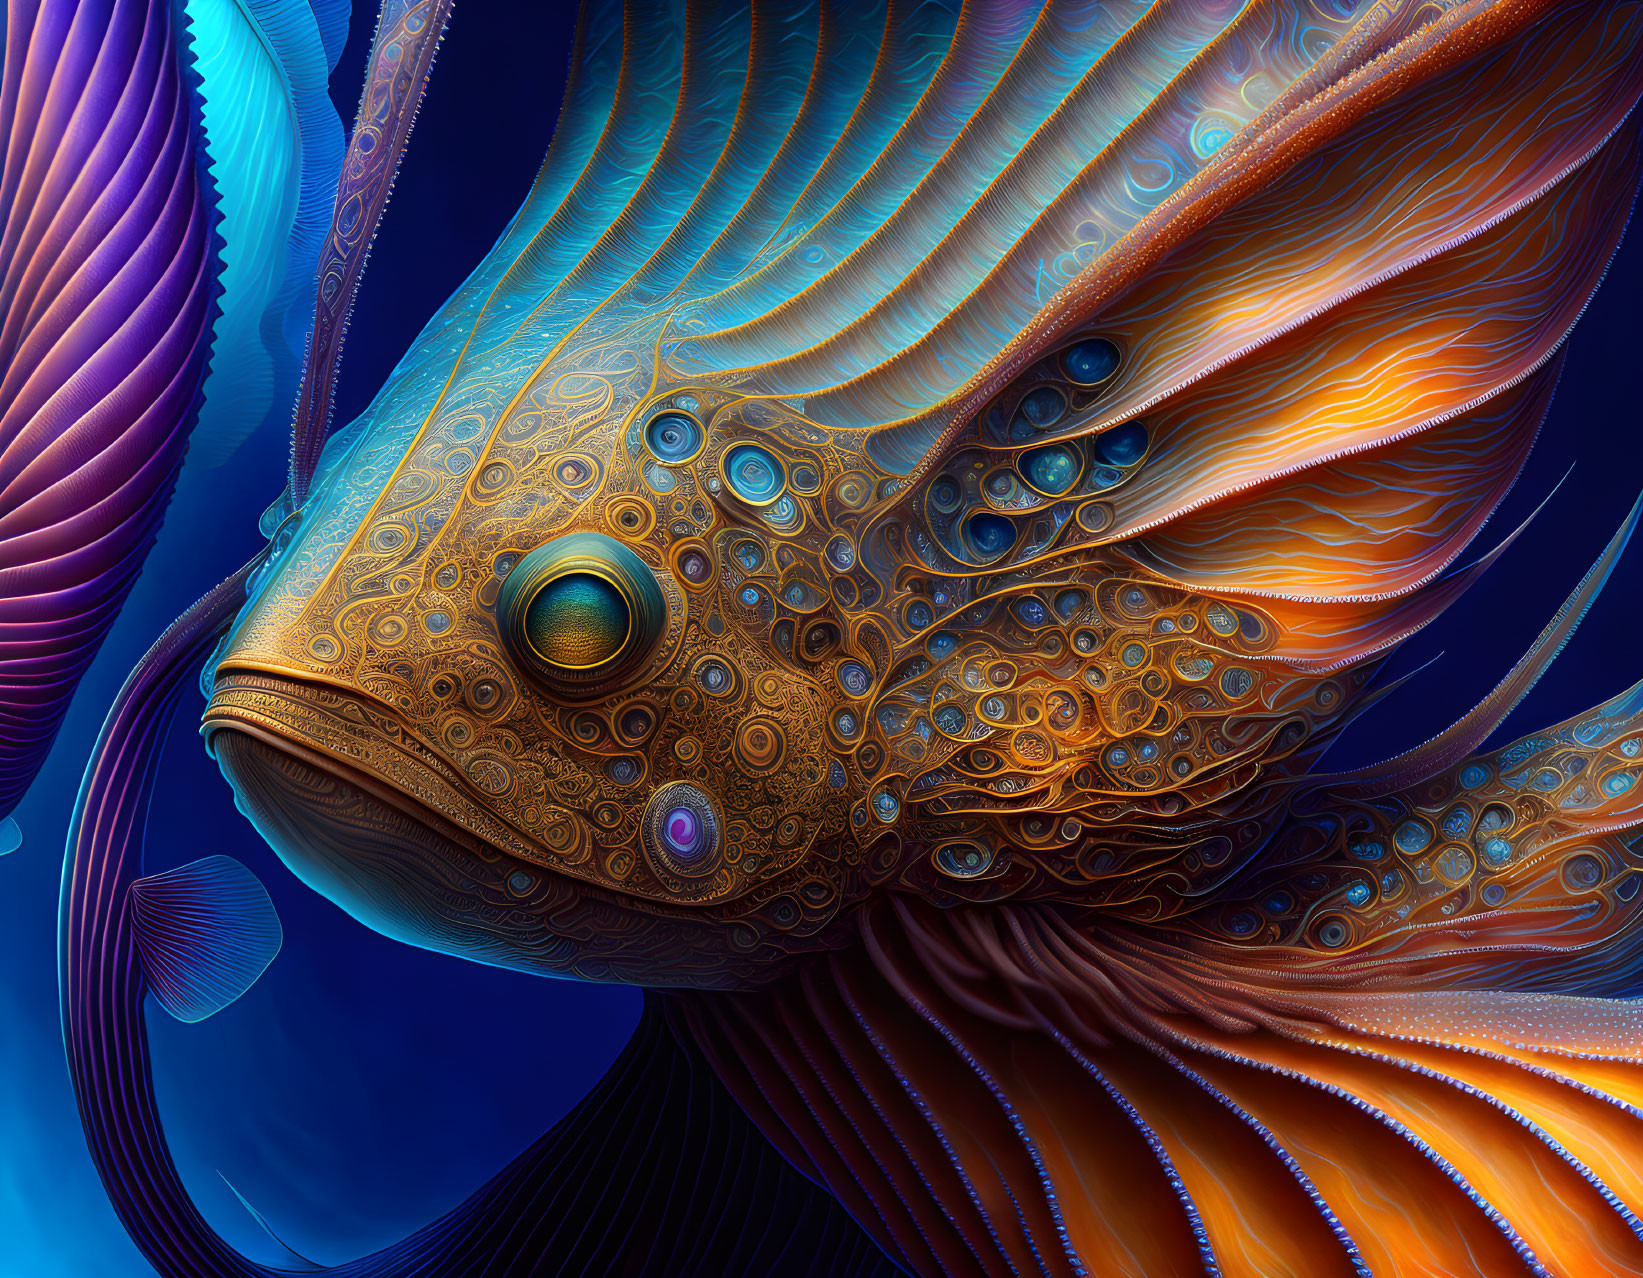 Colorful Stylized Fish Artwork with Intricate Patterns on Deep Blue Background